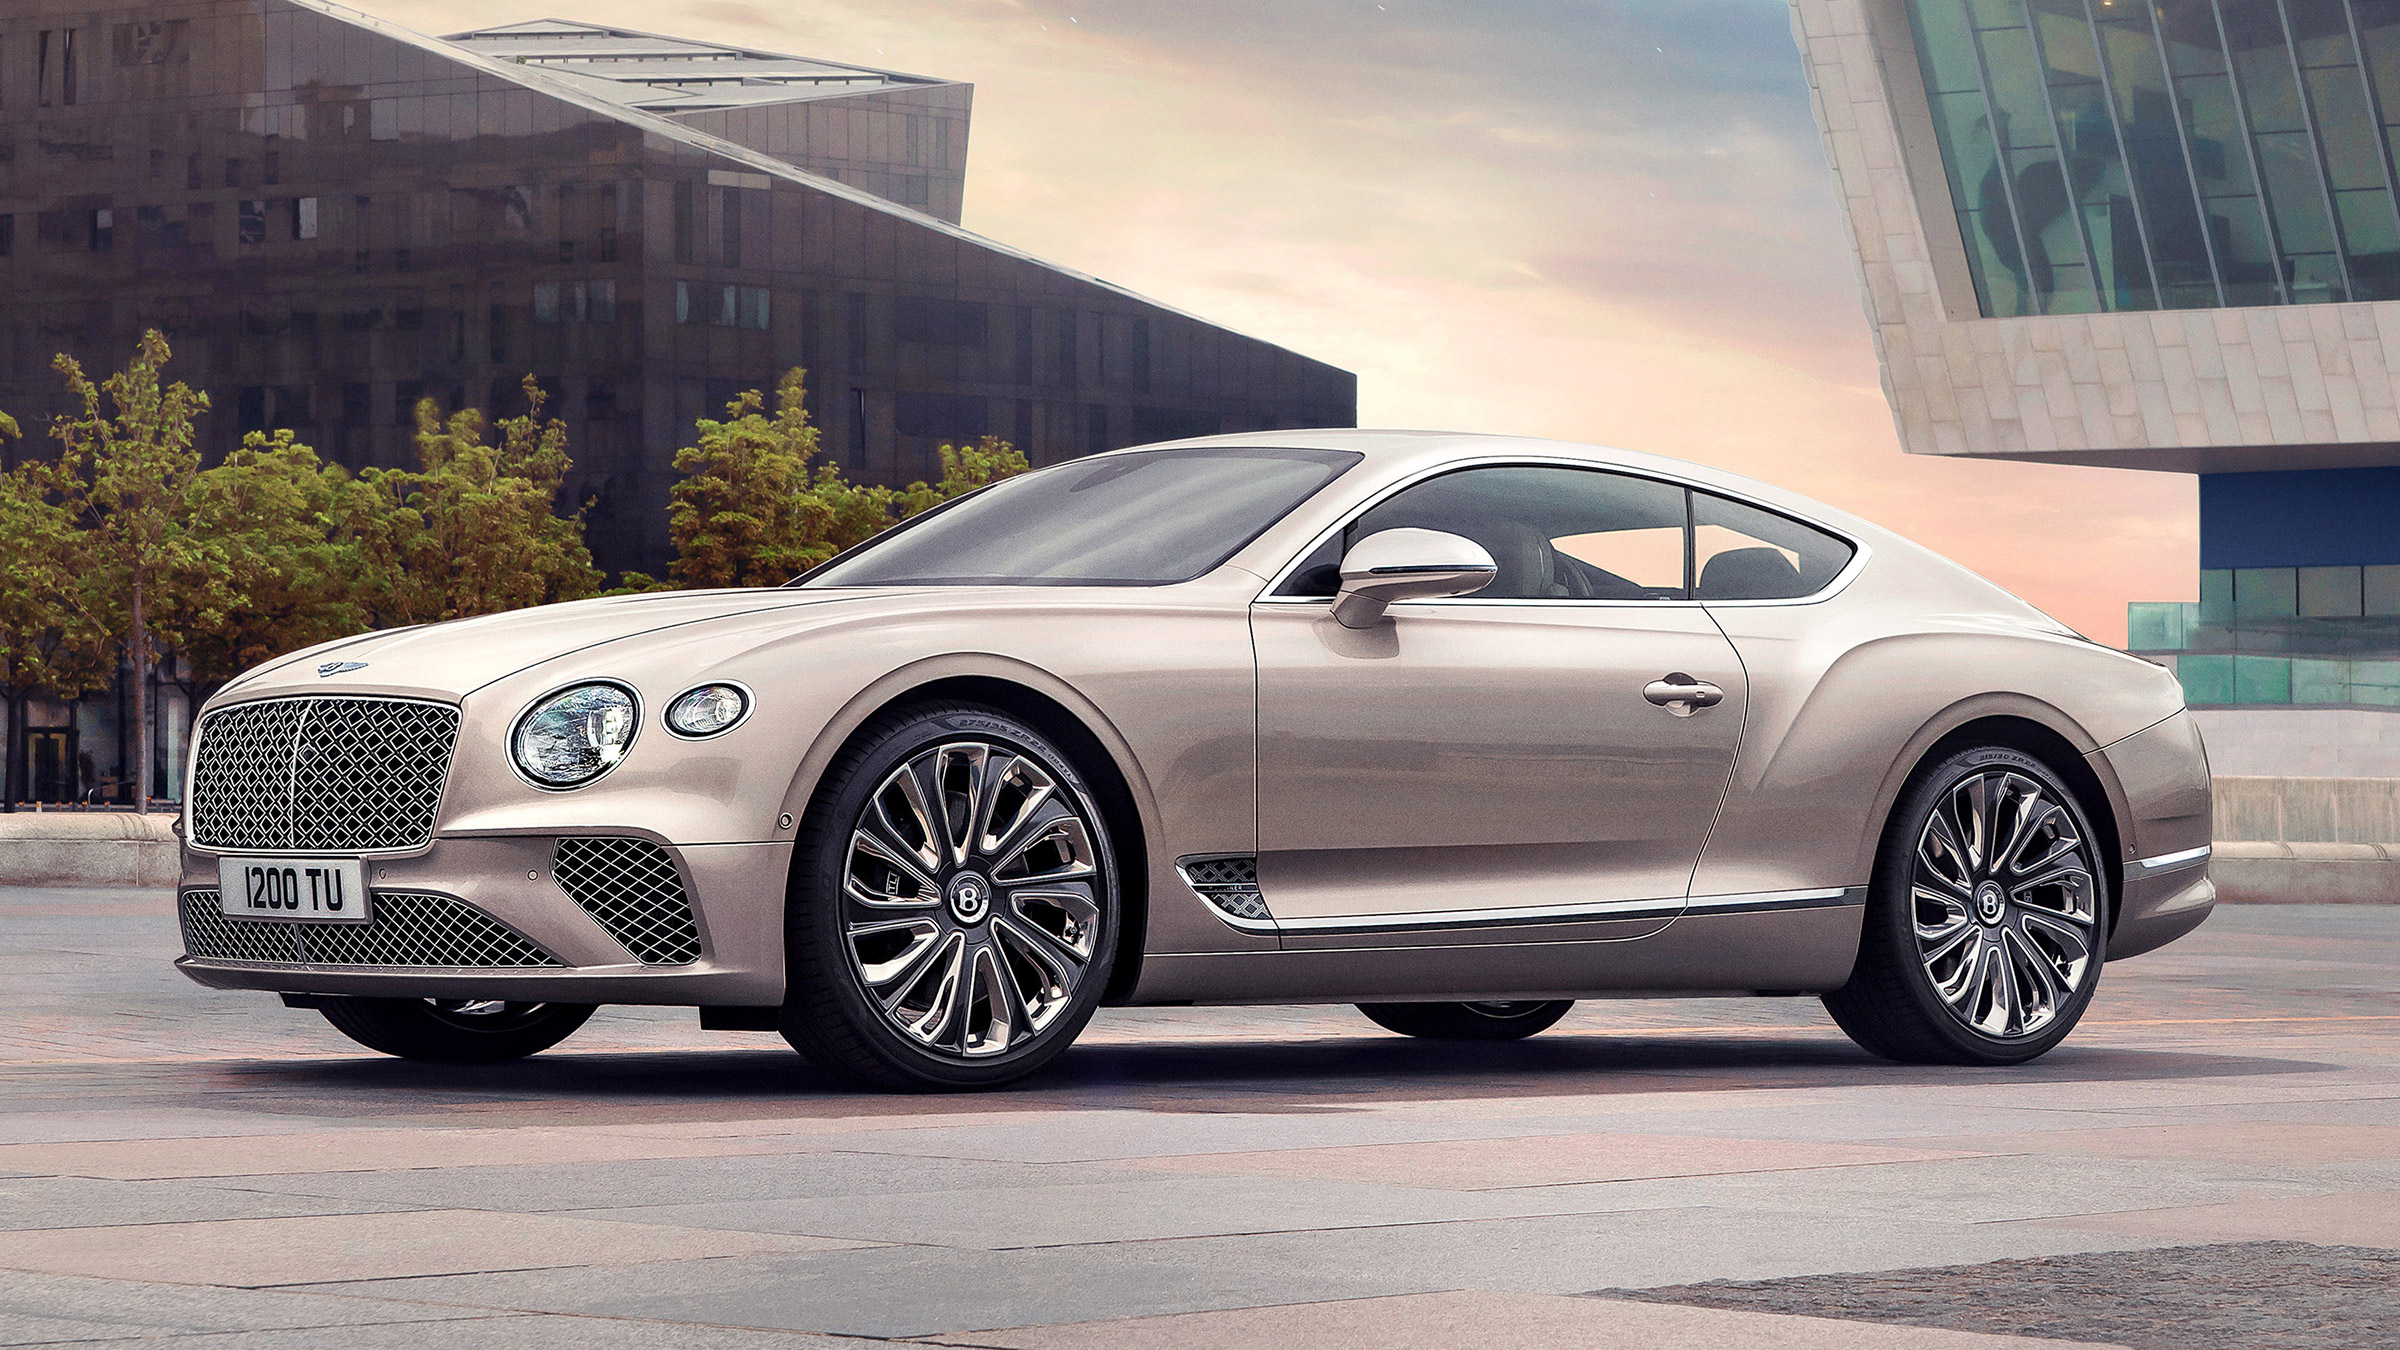 New Bentley Continental GT Mulliner Coupe debuts at Salon Prive Auto